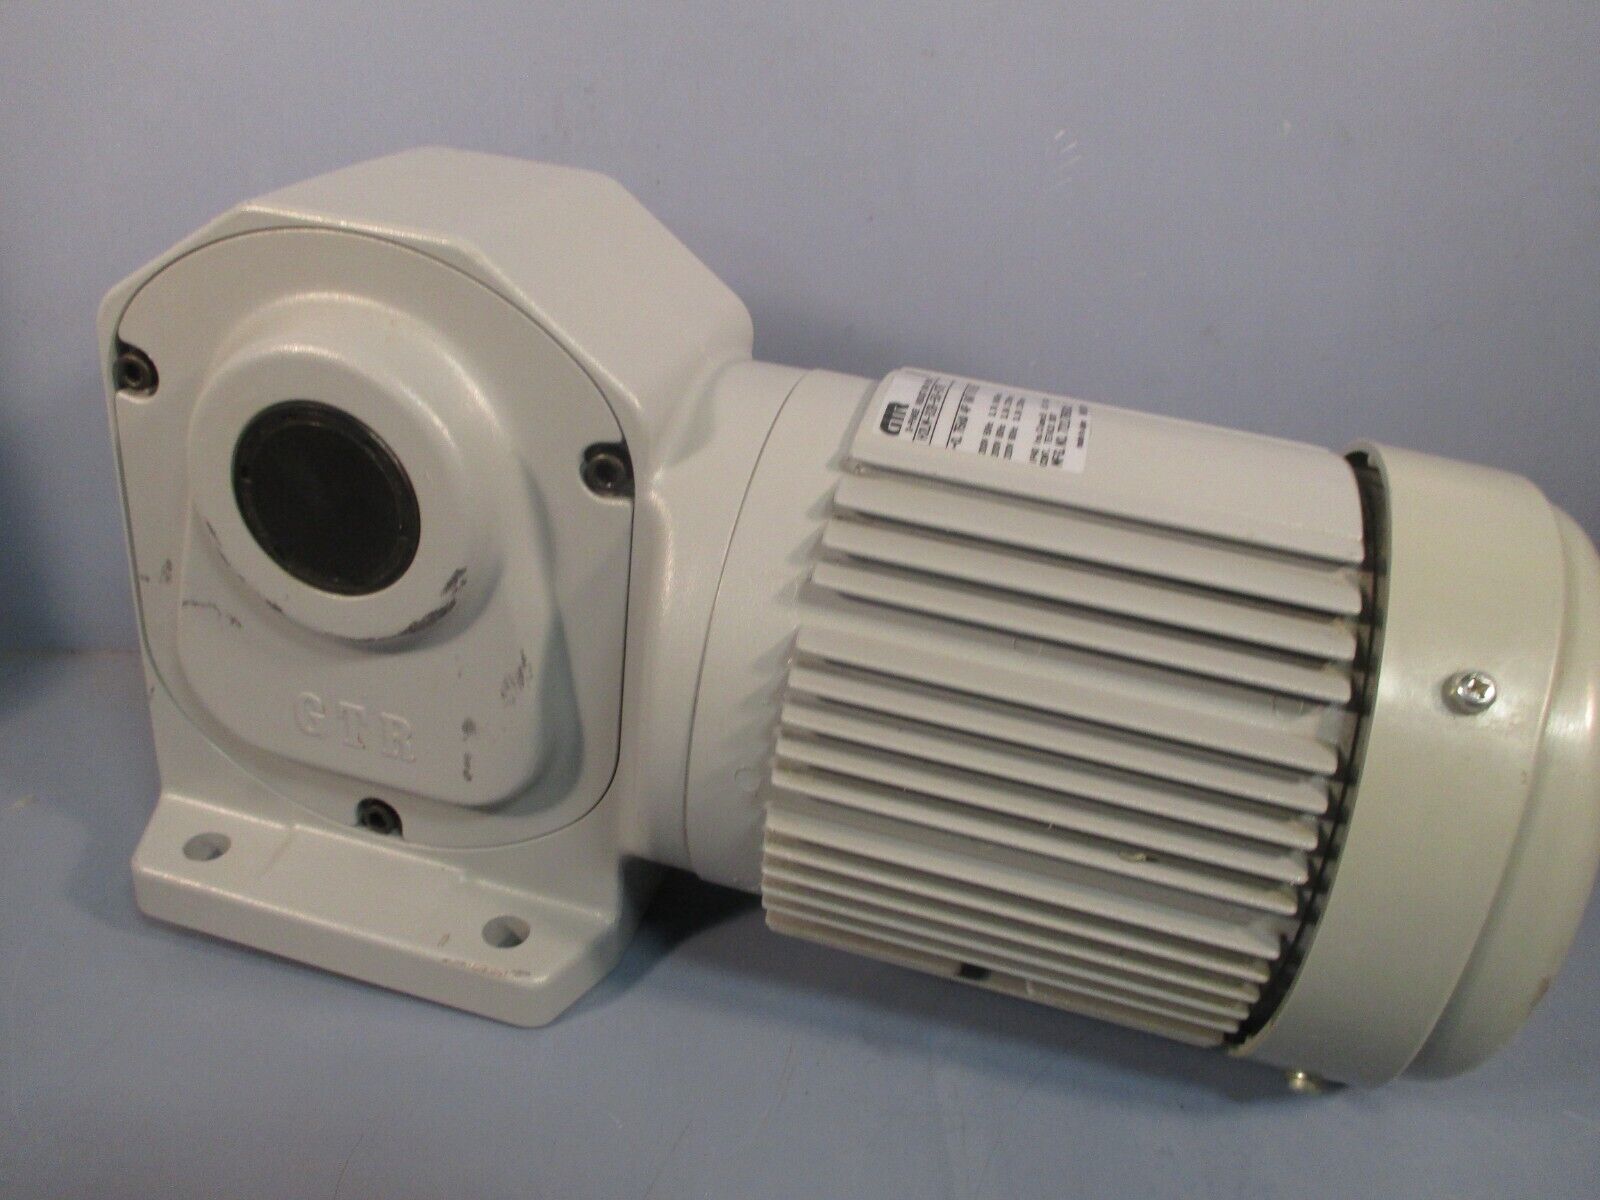 NISSEI CORP/GTR 3-PHASE INDUCTION MOTOR 0.75KW 220V 50:1 RATIO H2LM-32R-50-075